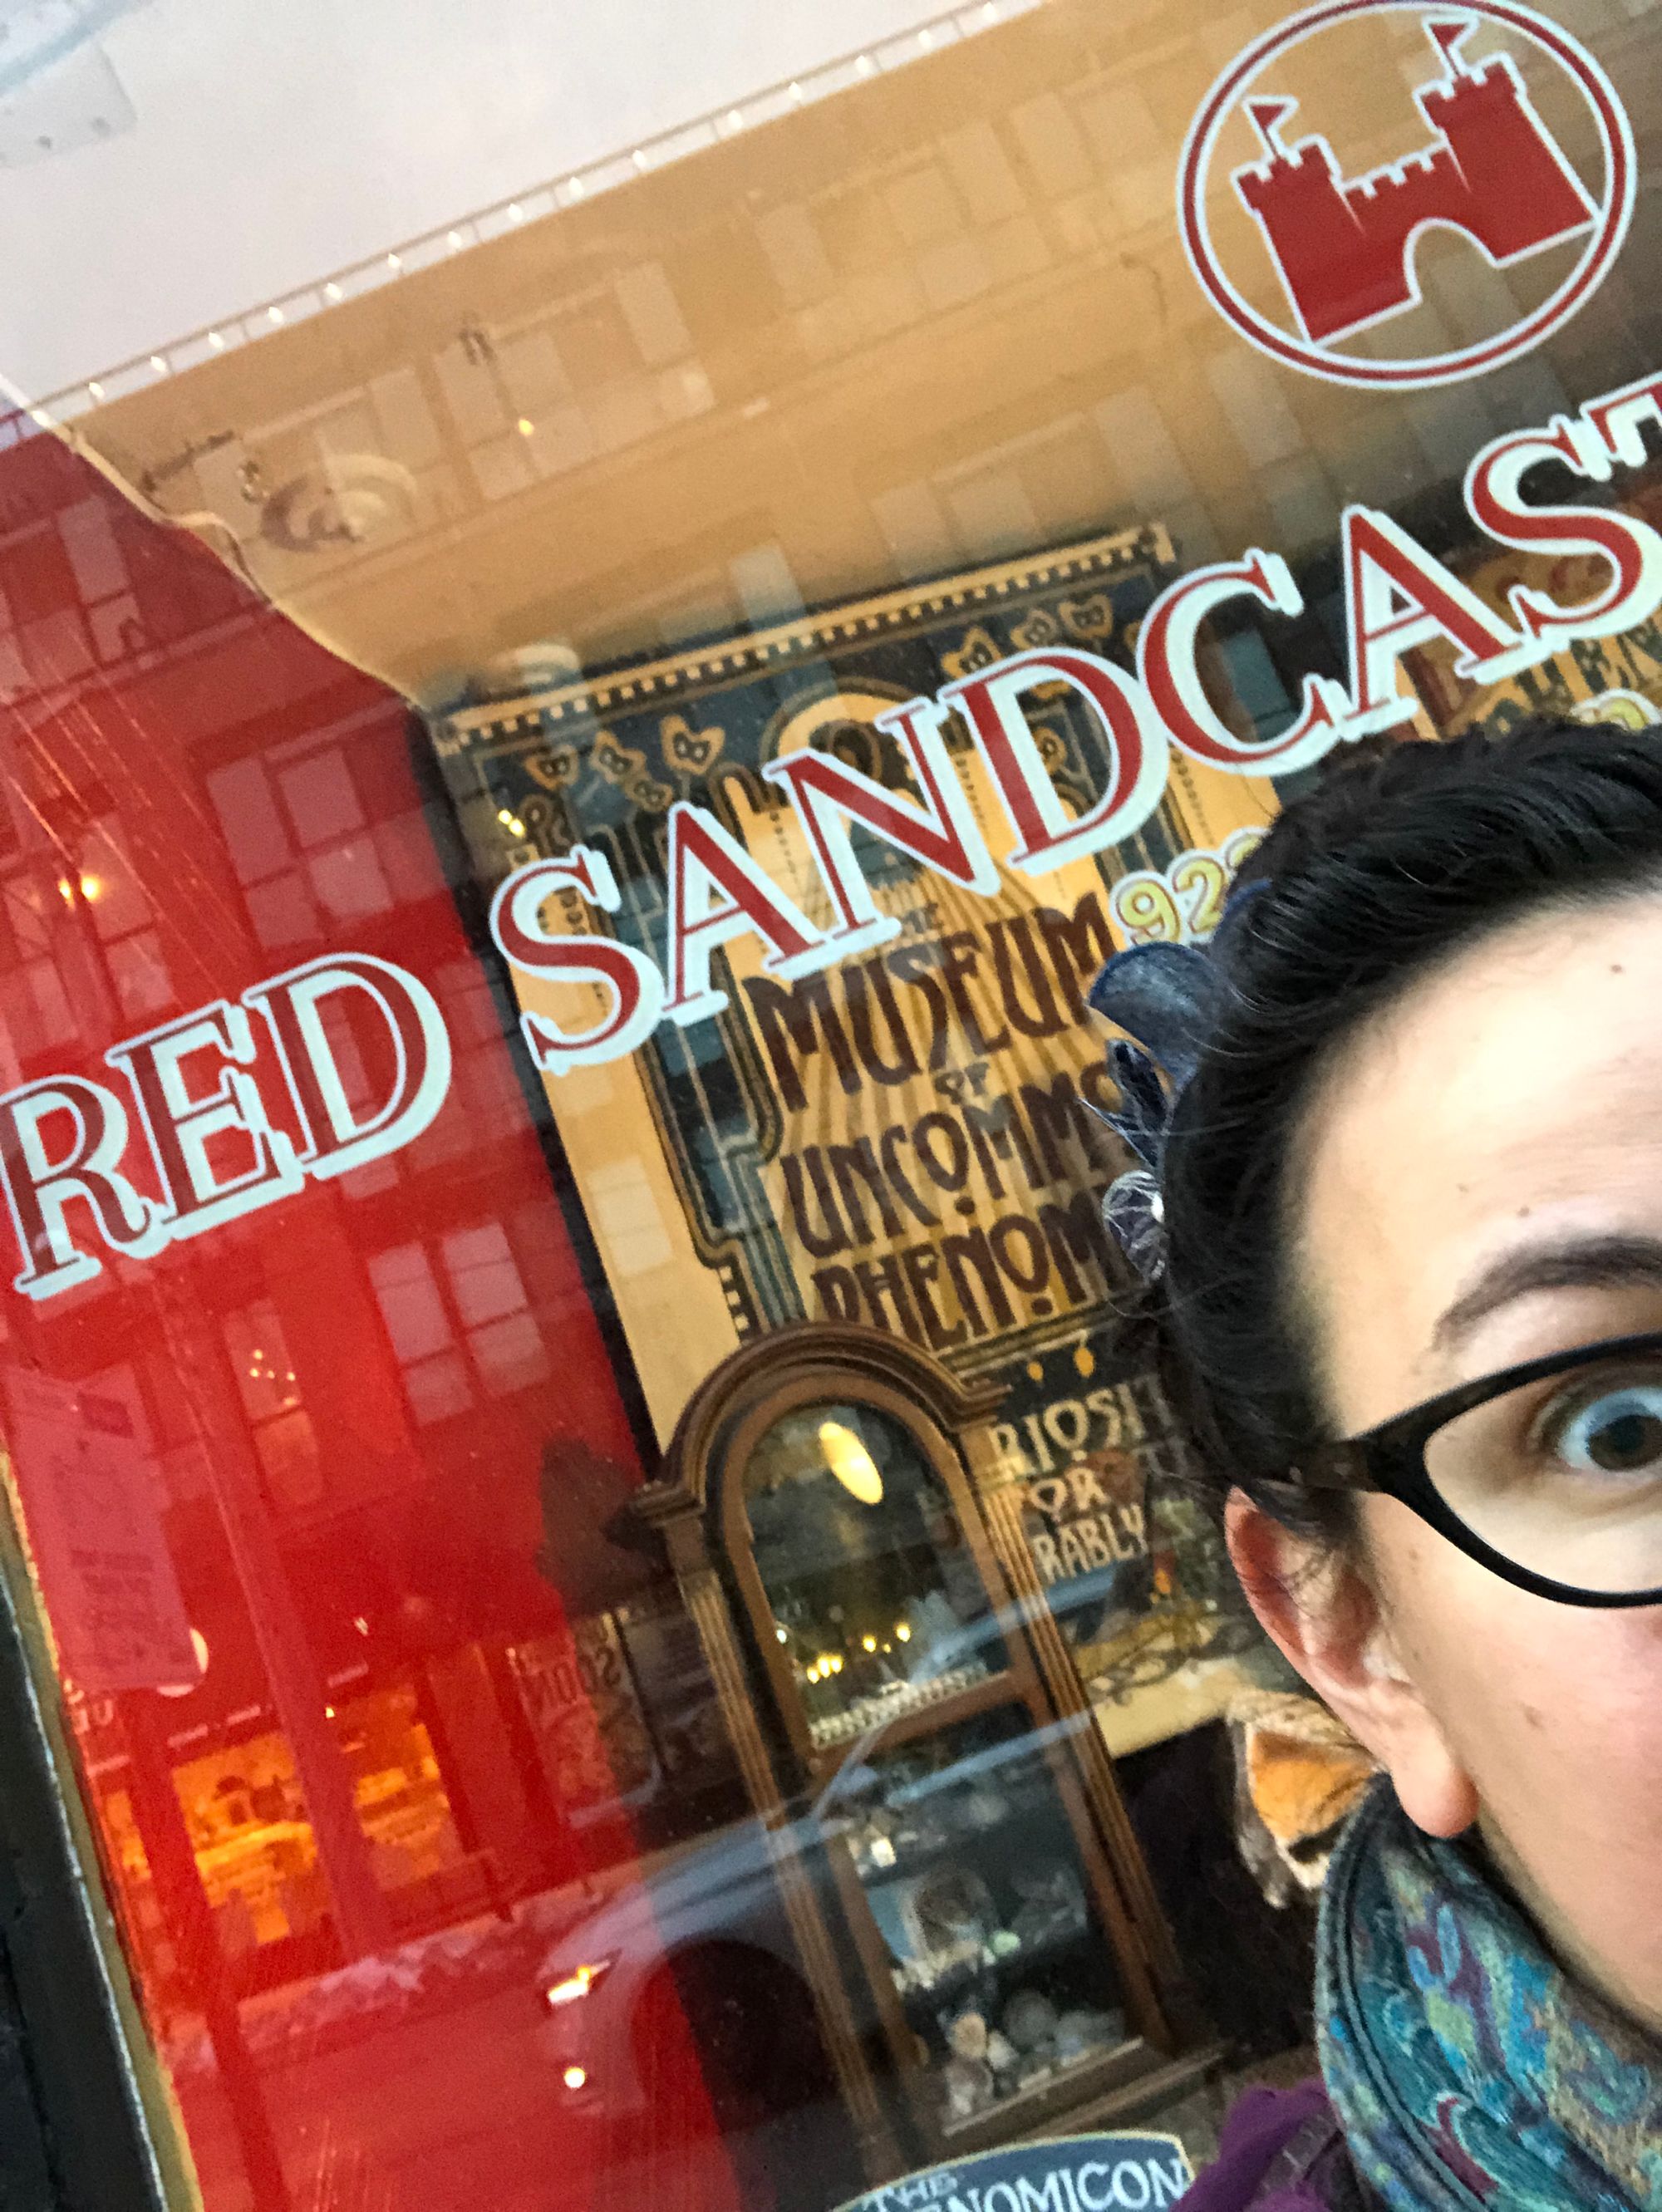 An angled photo capturing one eye and part of my face standing in front of the Red Sandcastle Theatre’s window—I’m trying to fit the whole logo and my face but simply cannot.